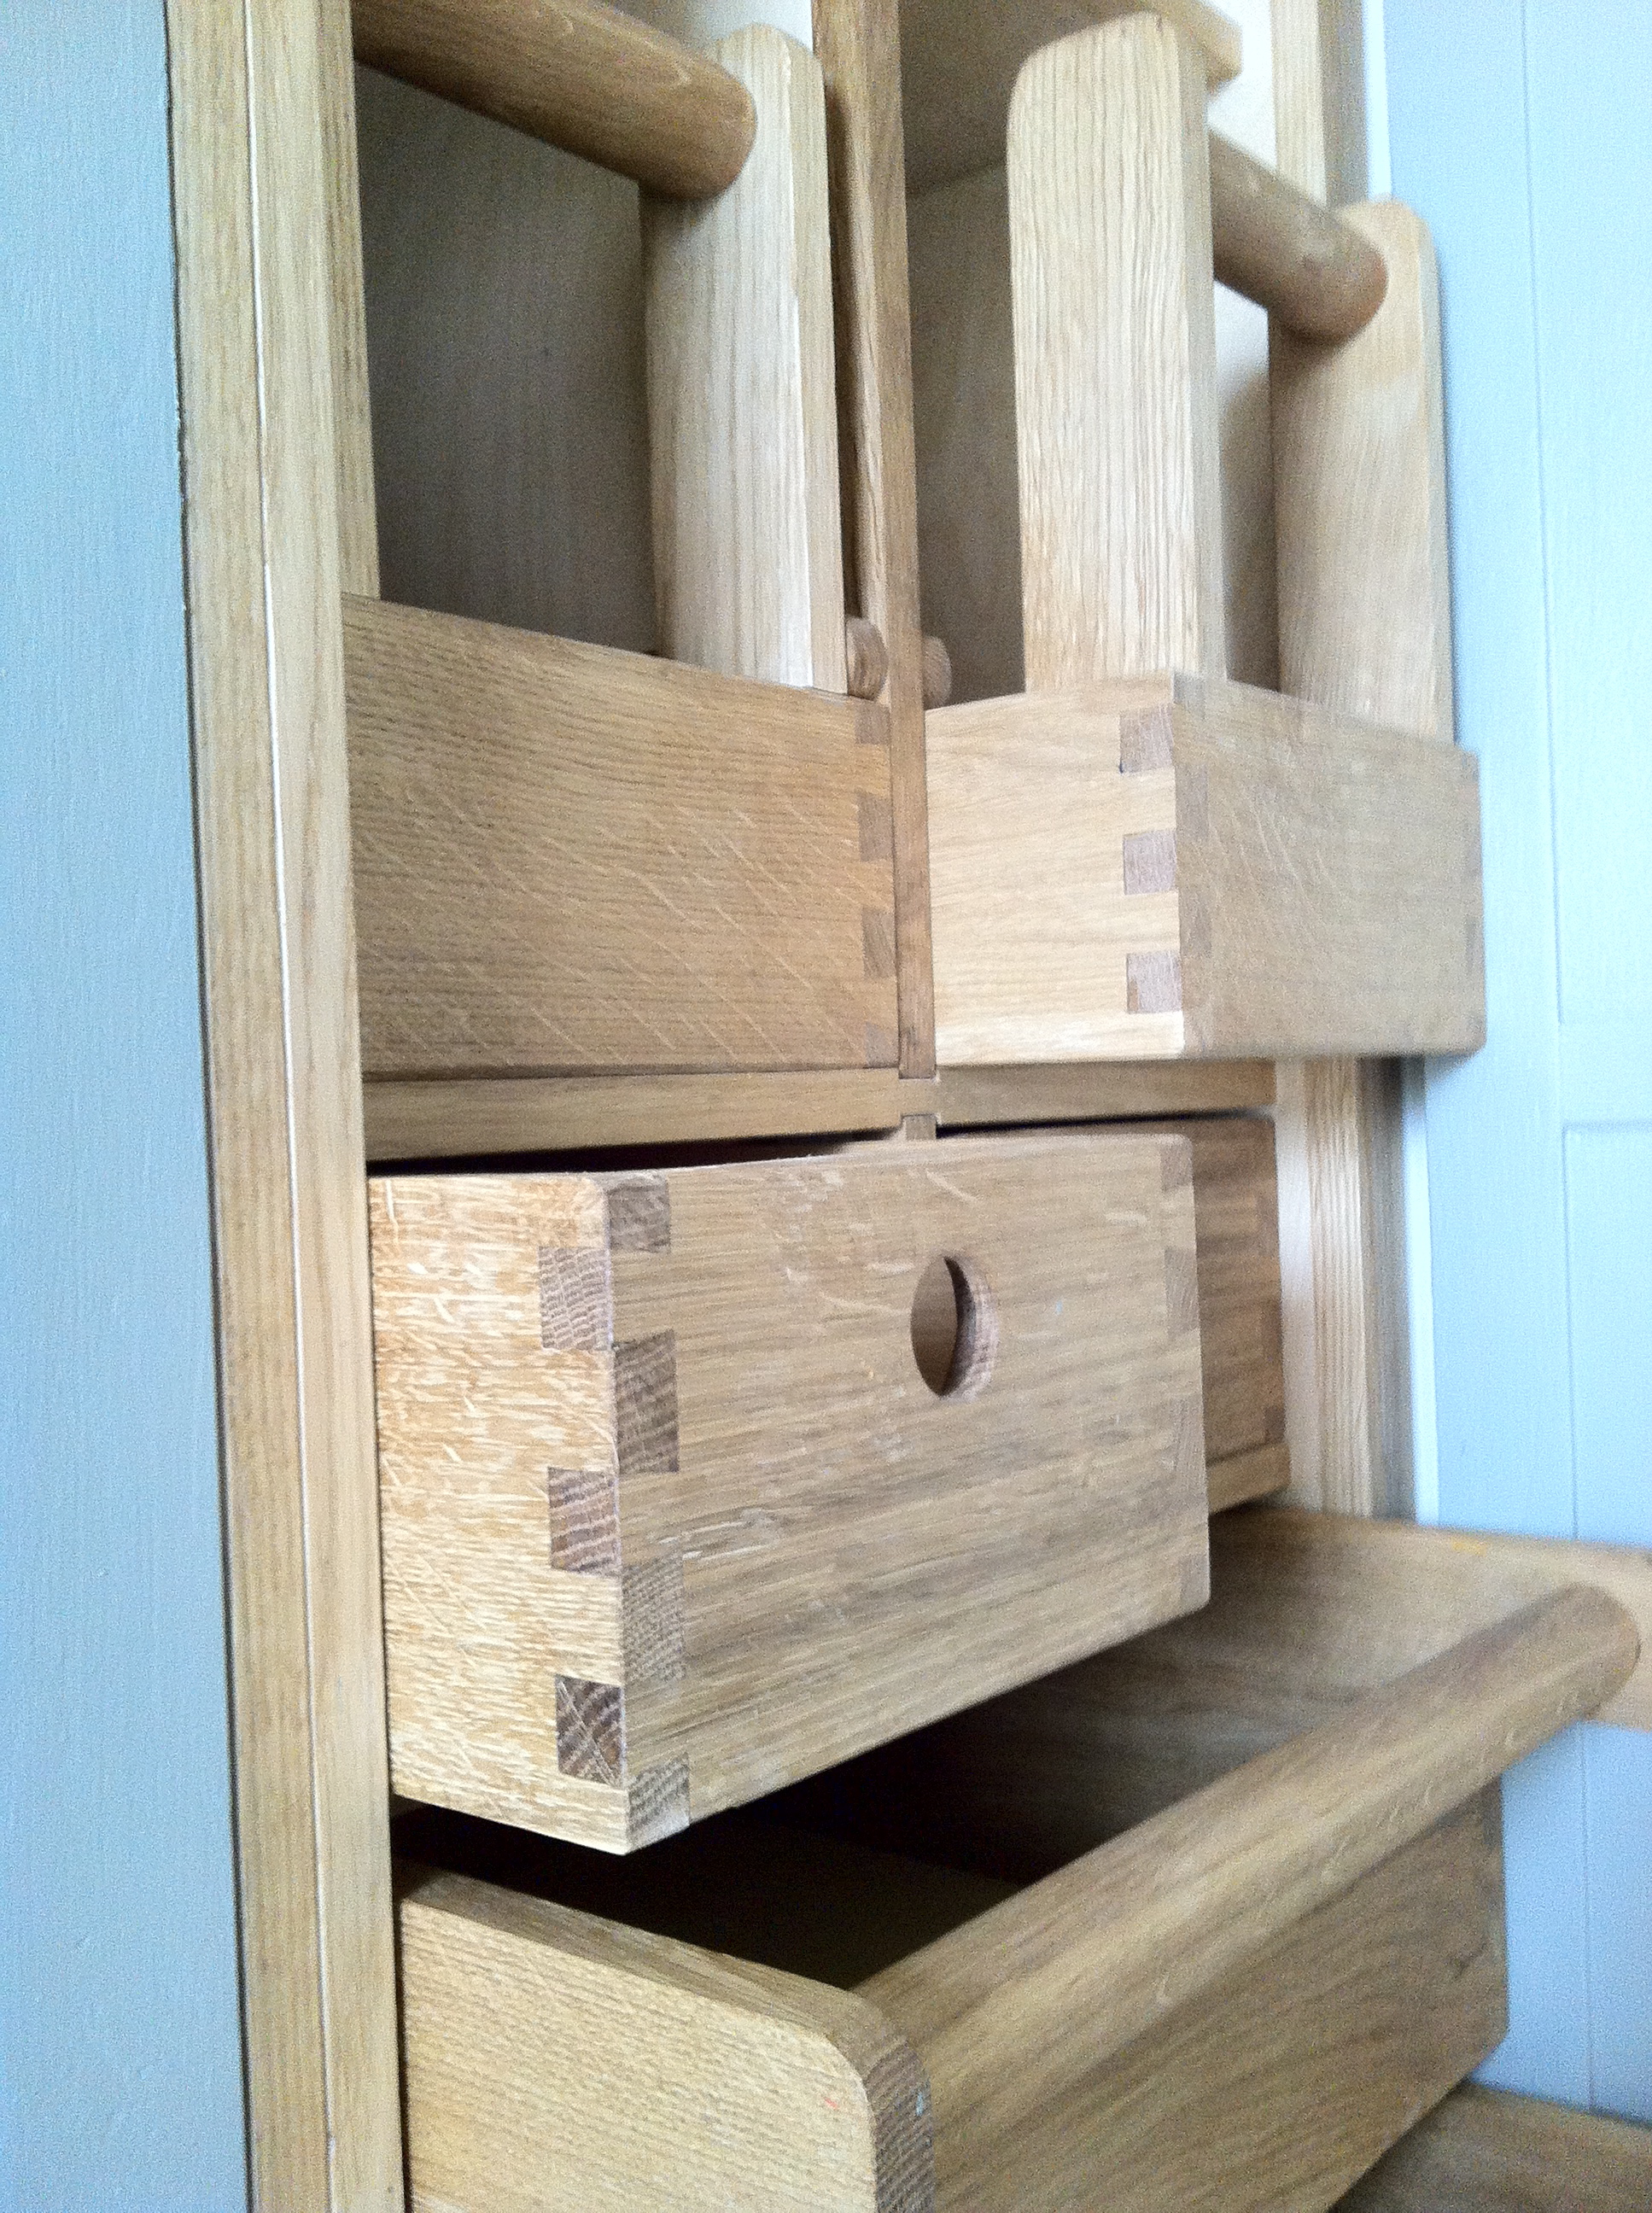 Dovetailed oak drawers